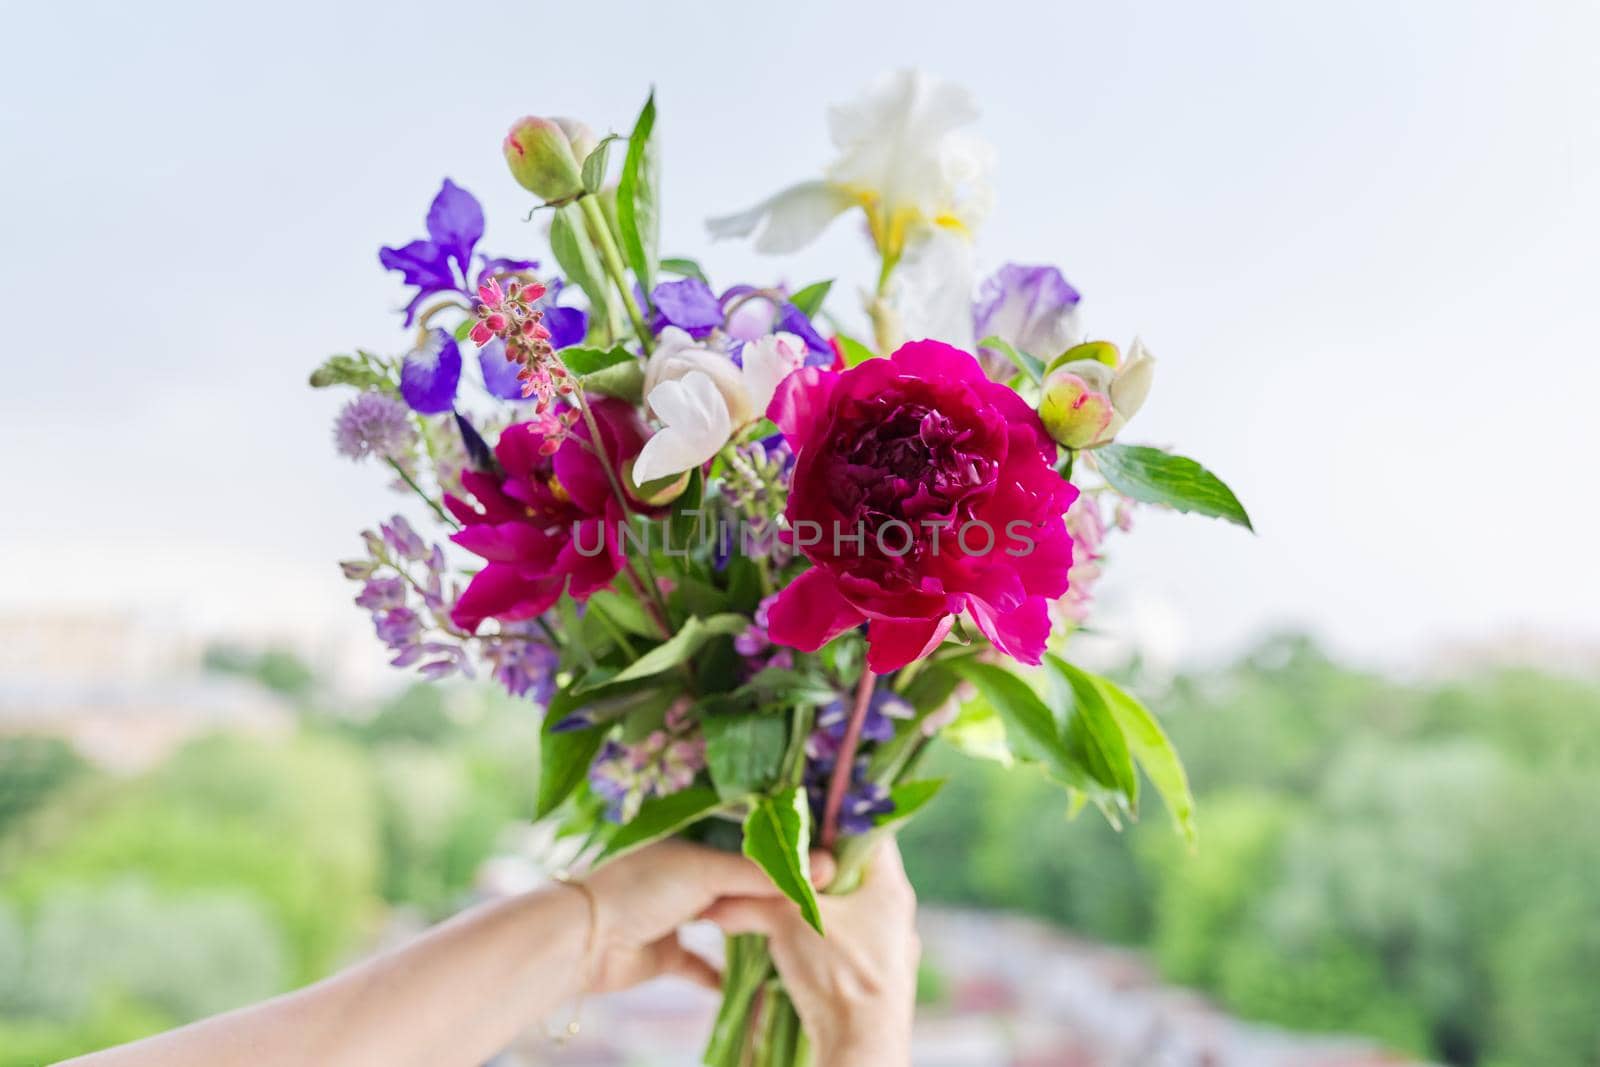 Close-up of bright bouquet of flowers in female hand. Fresh flowers and buds of peonies iris lupine in flower arrangement. Season spring summer, natural beauty, background open window blue sky